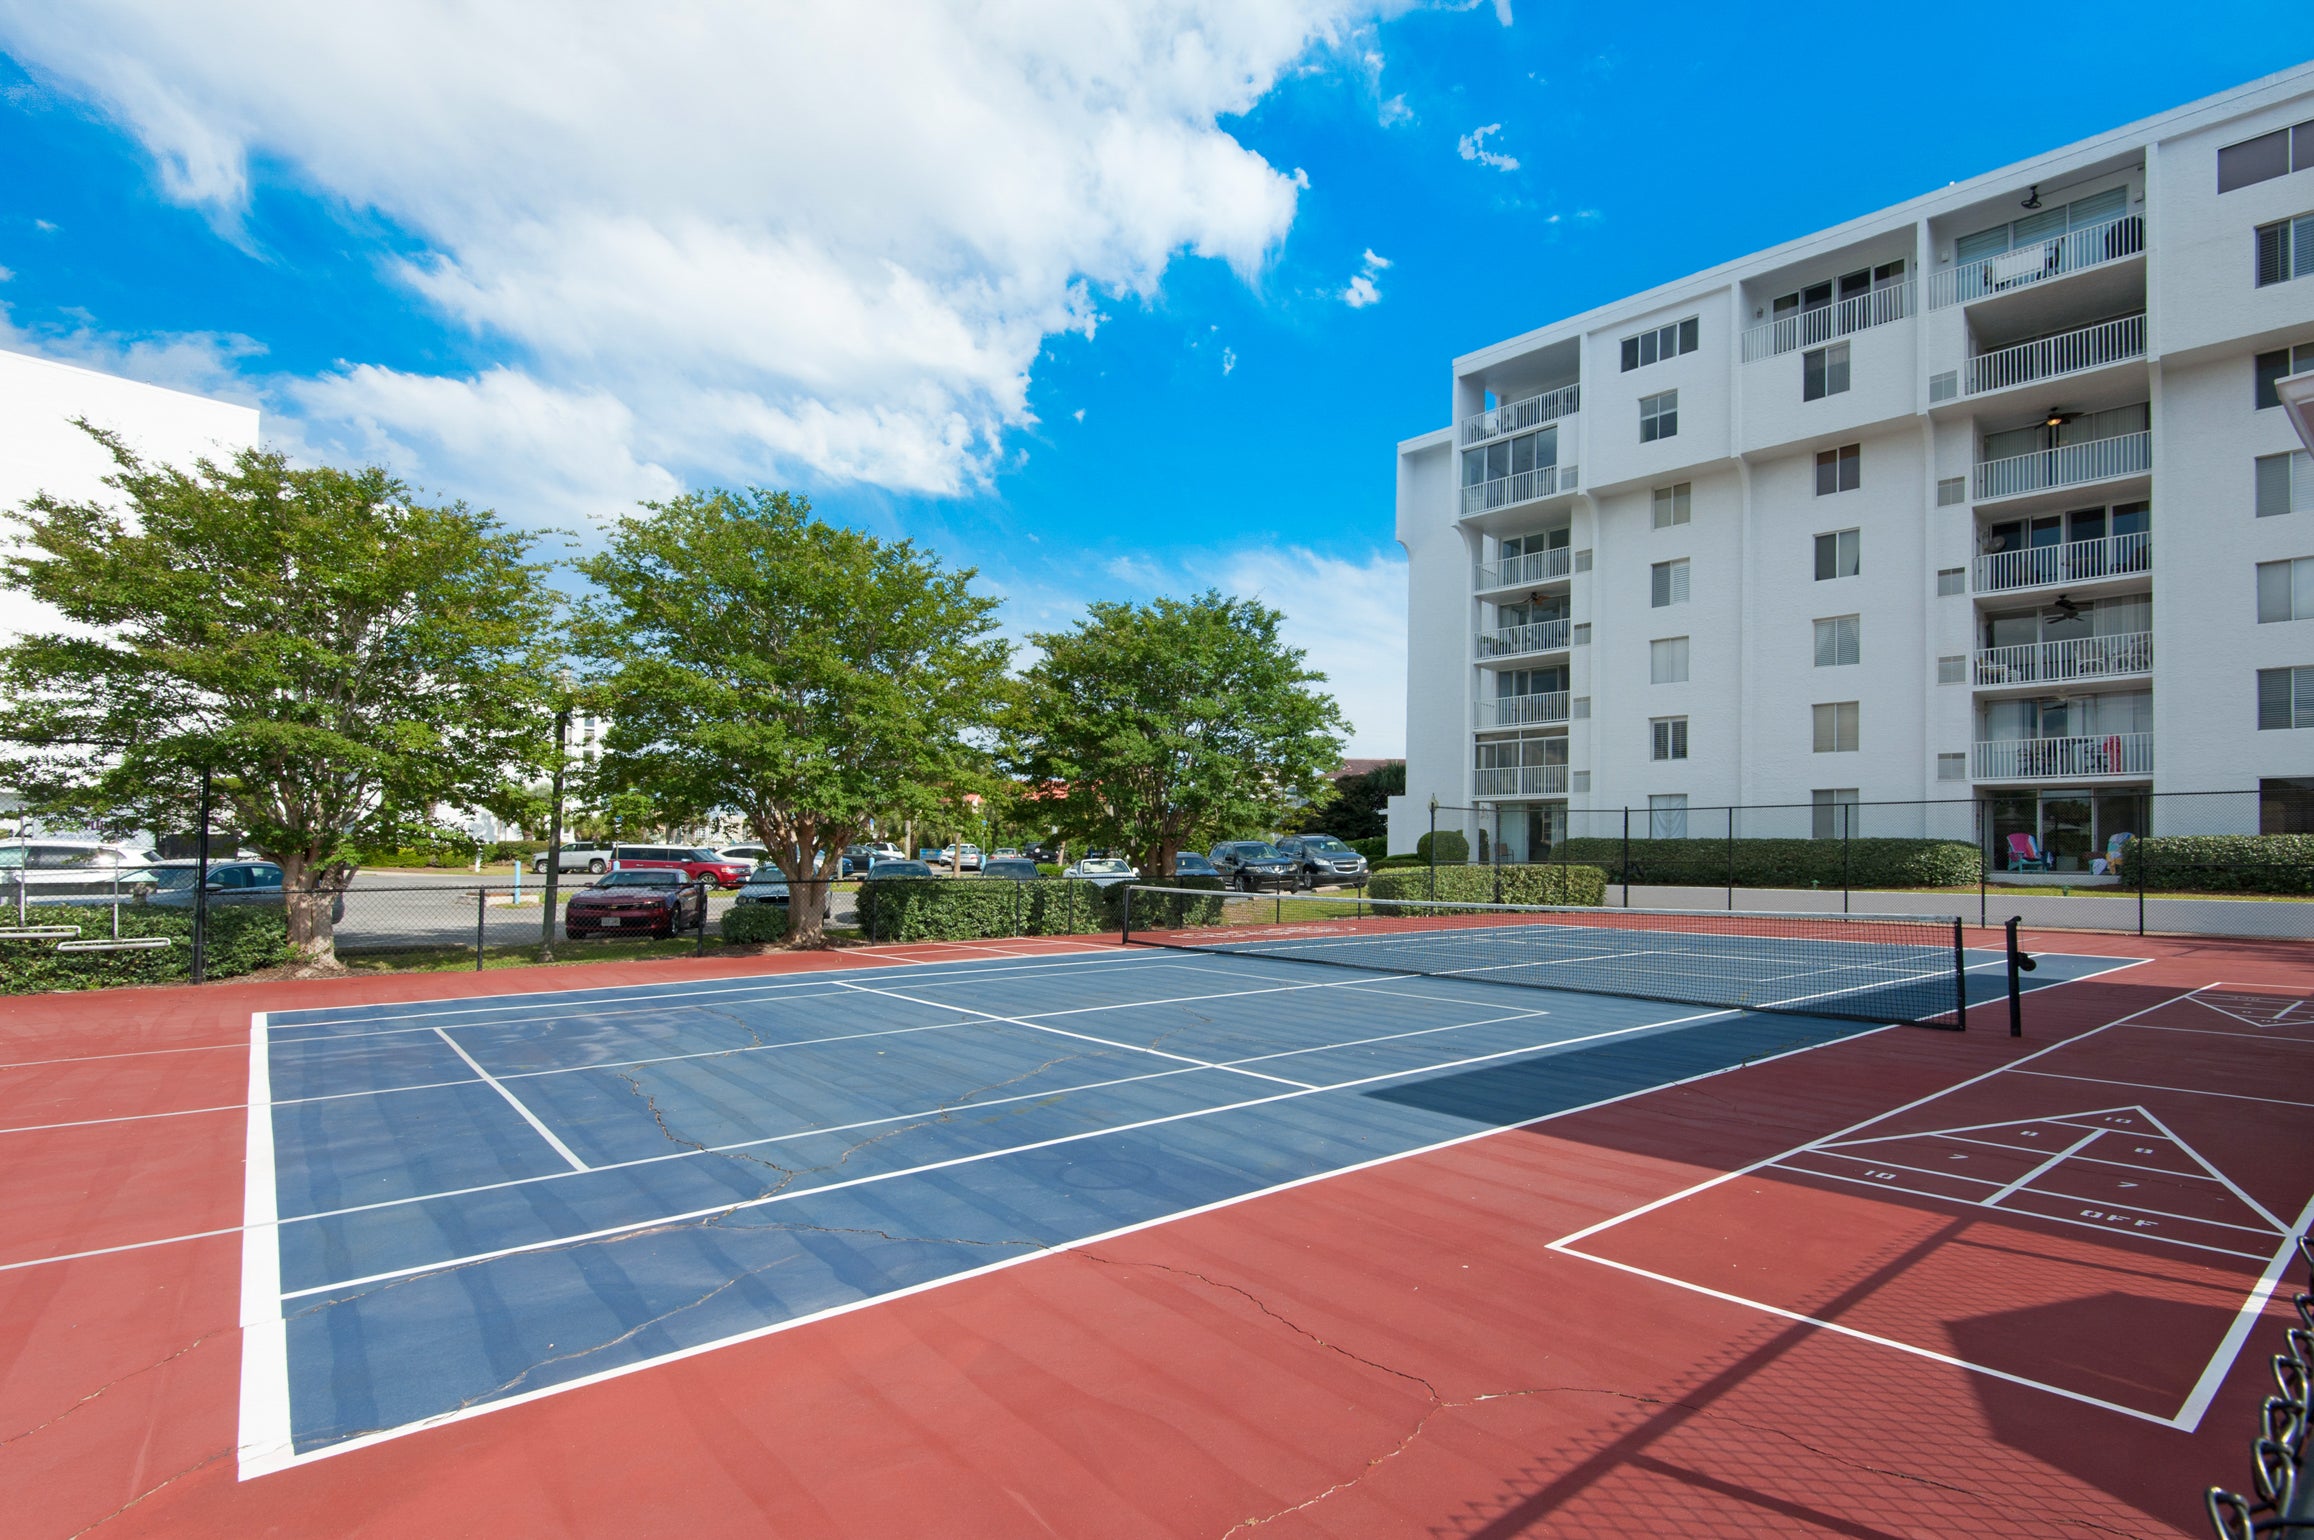 Tennis Courts at Dolphin Point